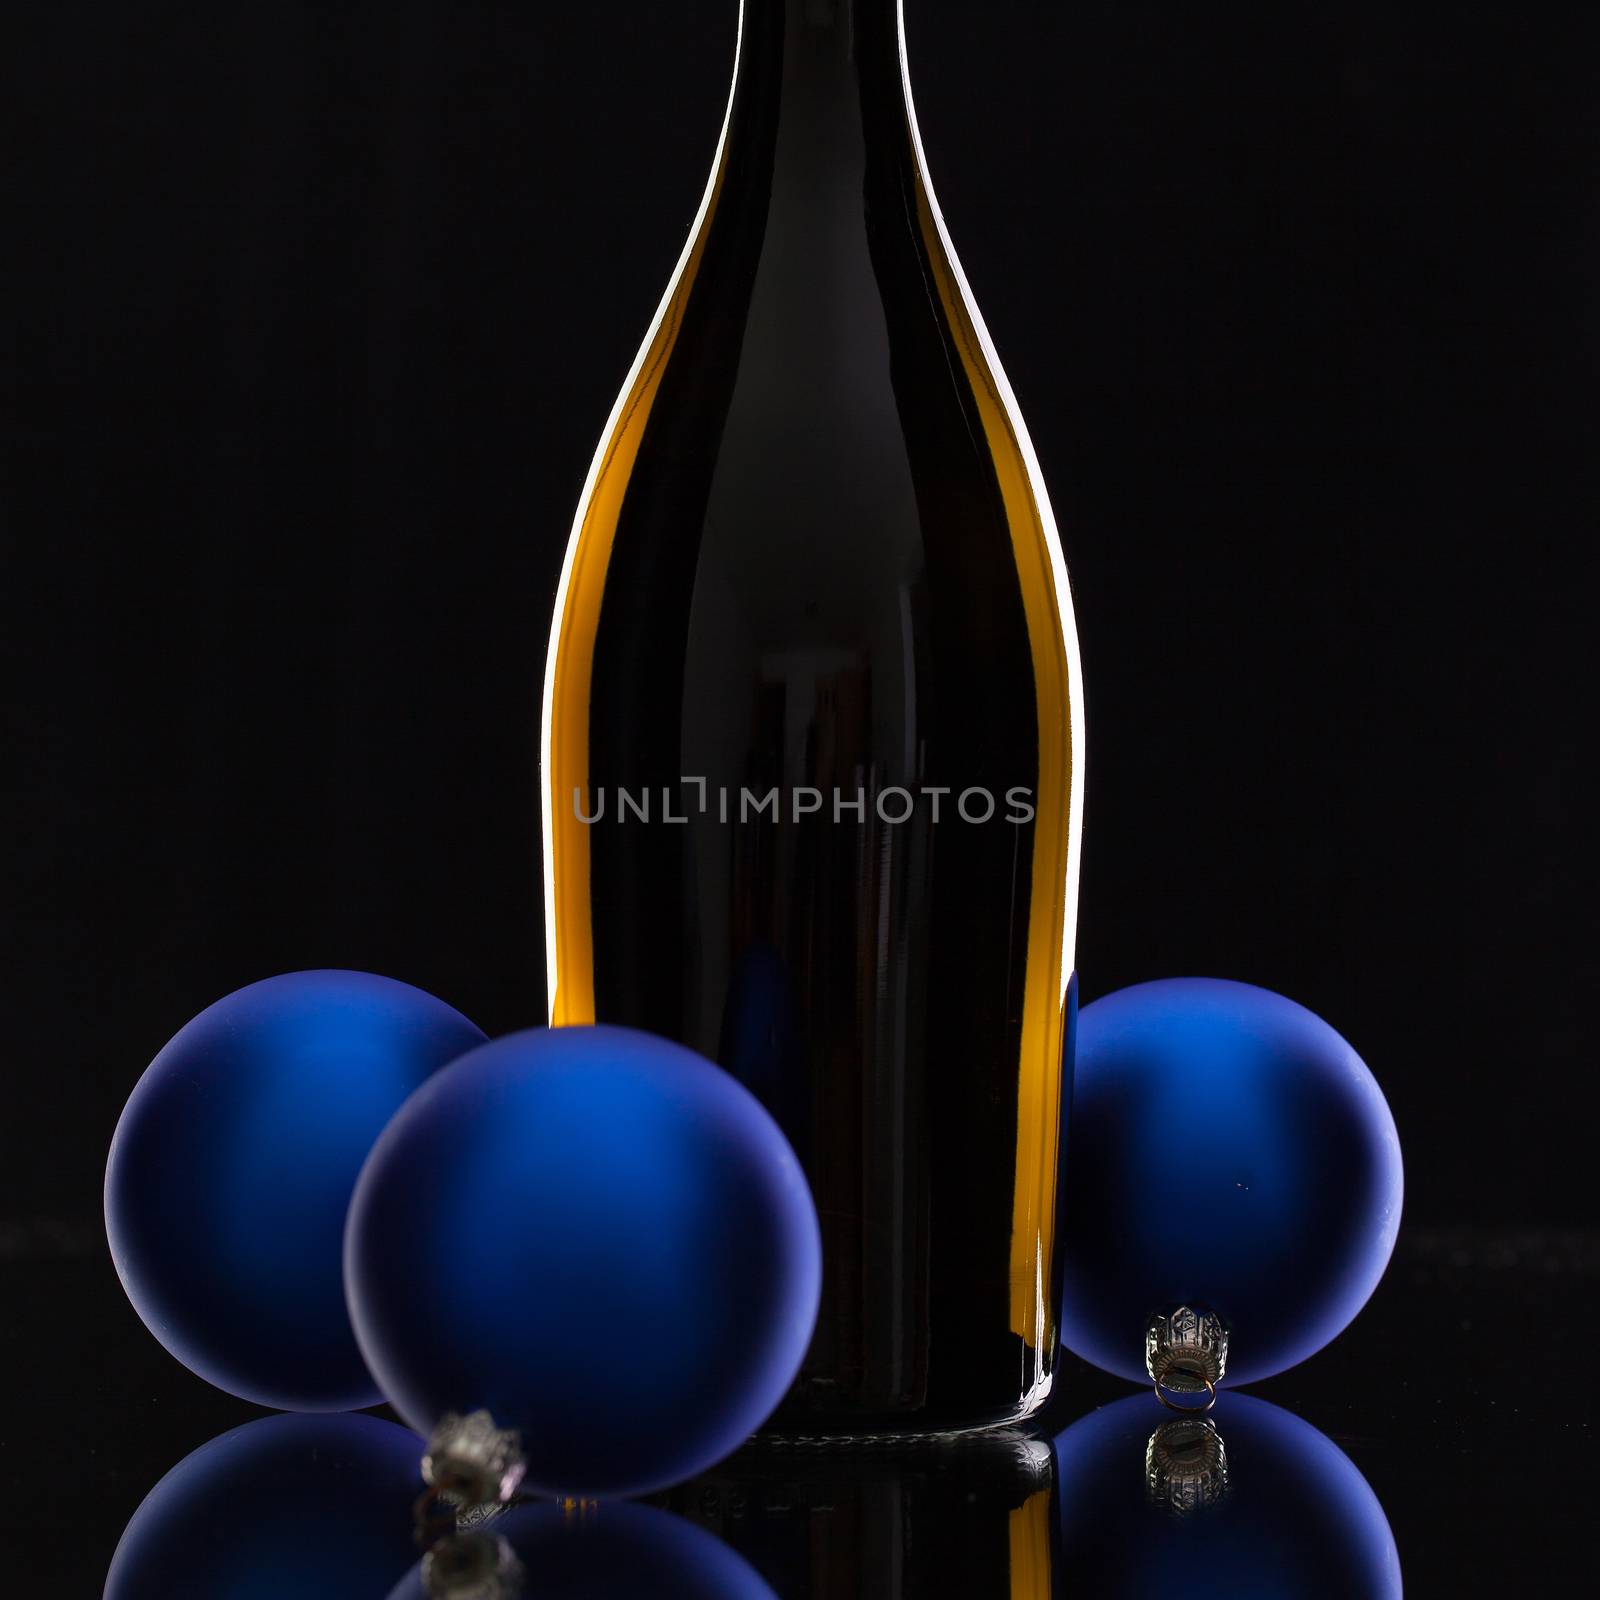 The bottle of red wine and Christmas decoration on a black glass desk